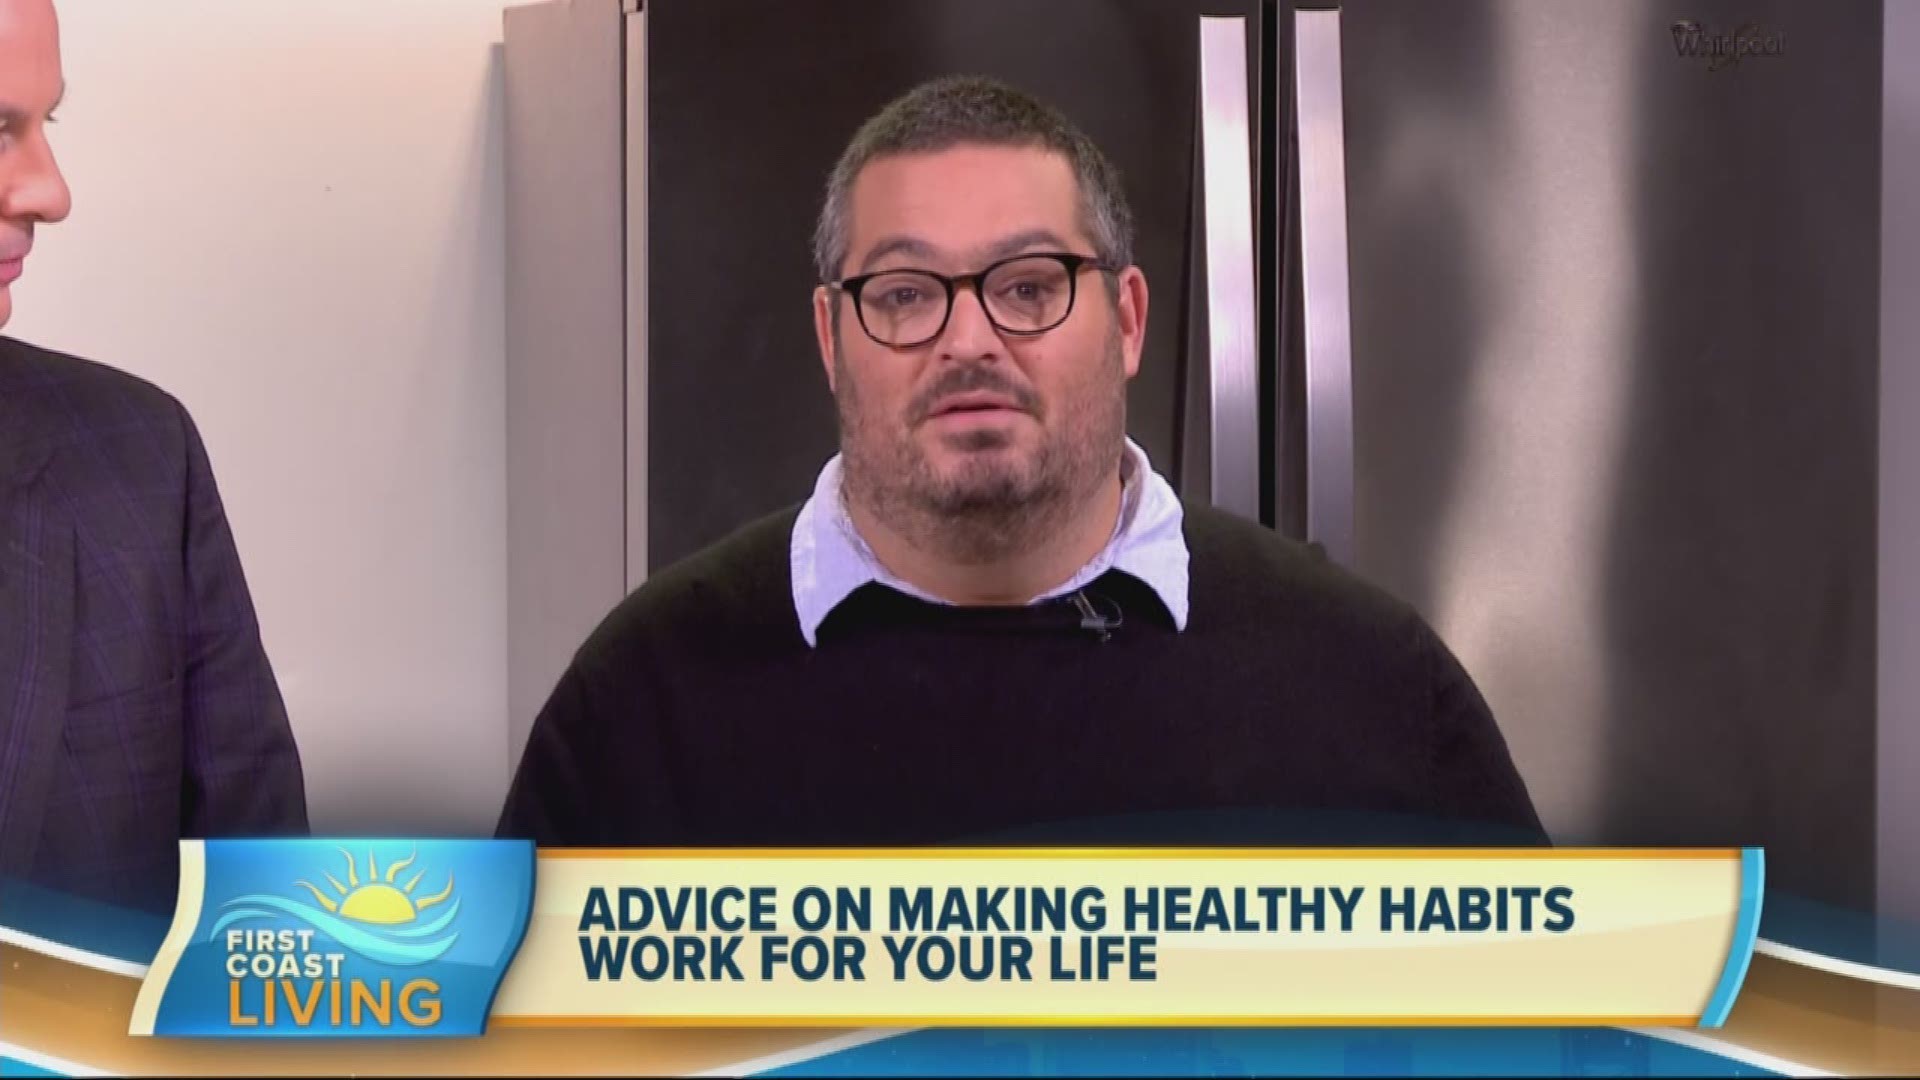 Doctor Gary Foster shares tips on how we can make and maintain healthy habits for our day to day lives.